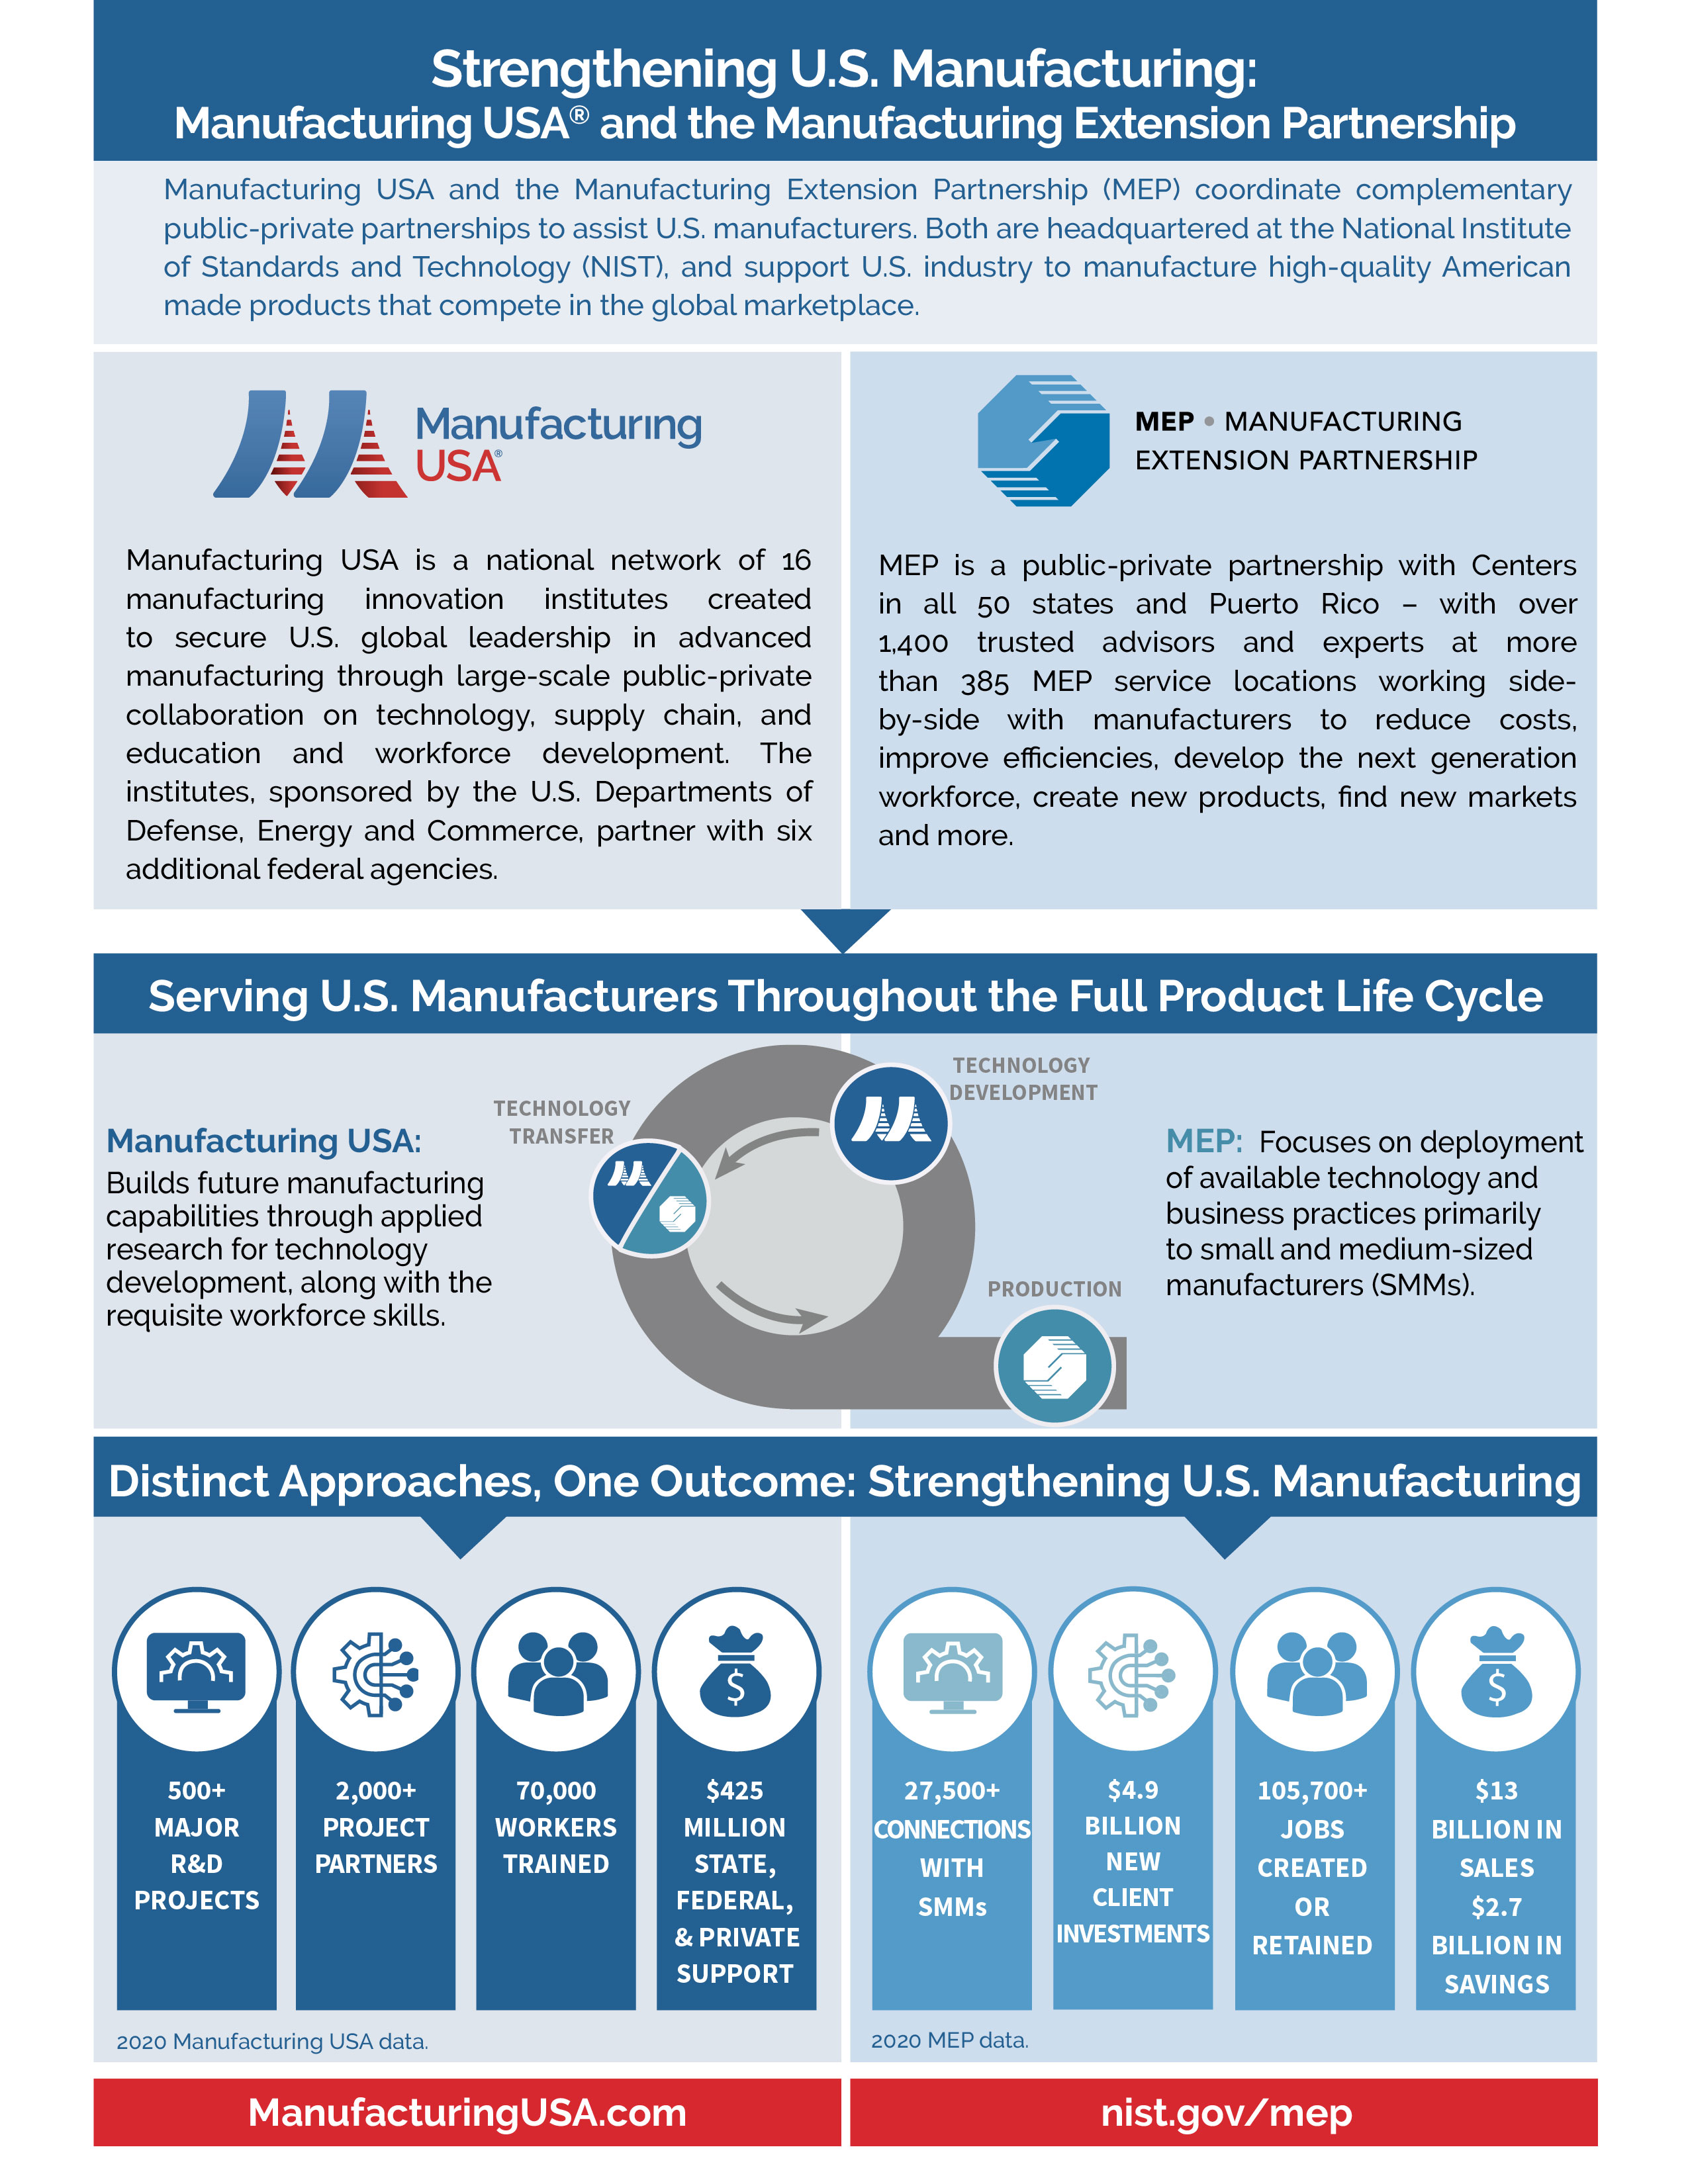 Strengthening U.S. Manufacturing: Manufacturing USA® and the Manufacturing Extension Partnership page 1